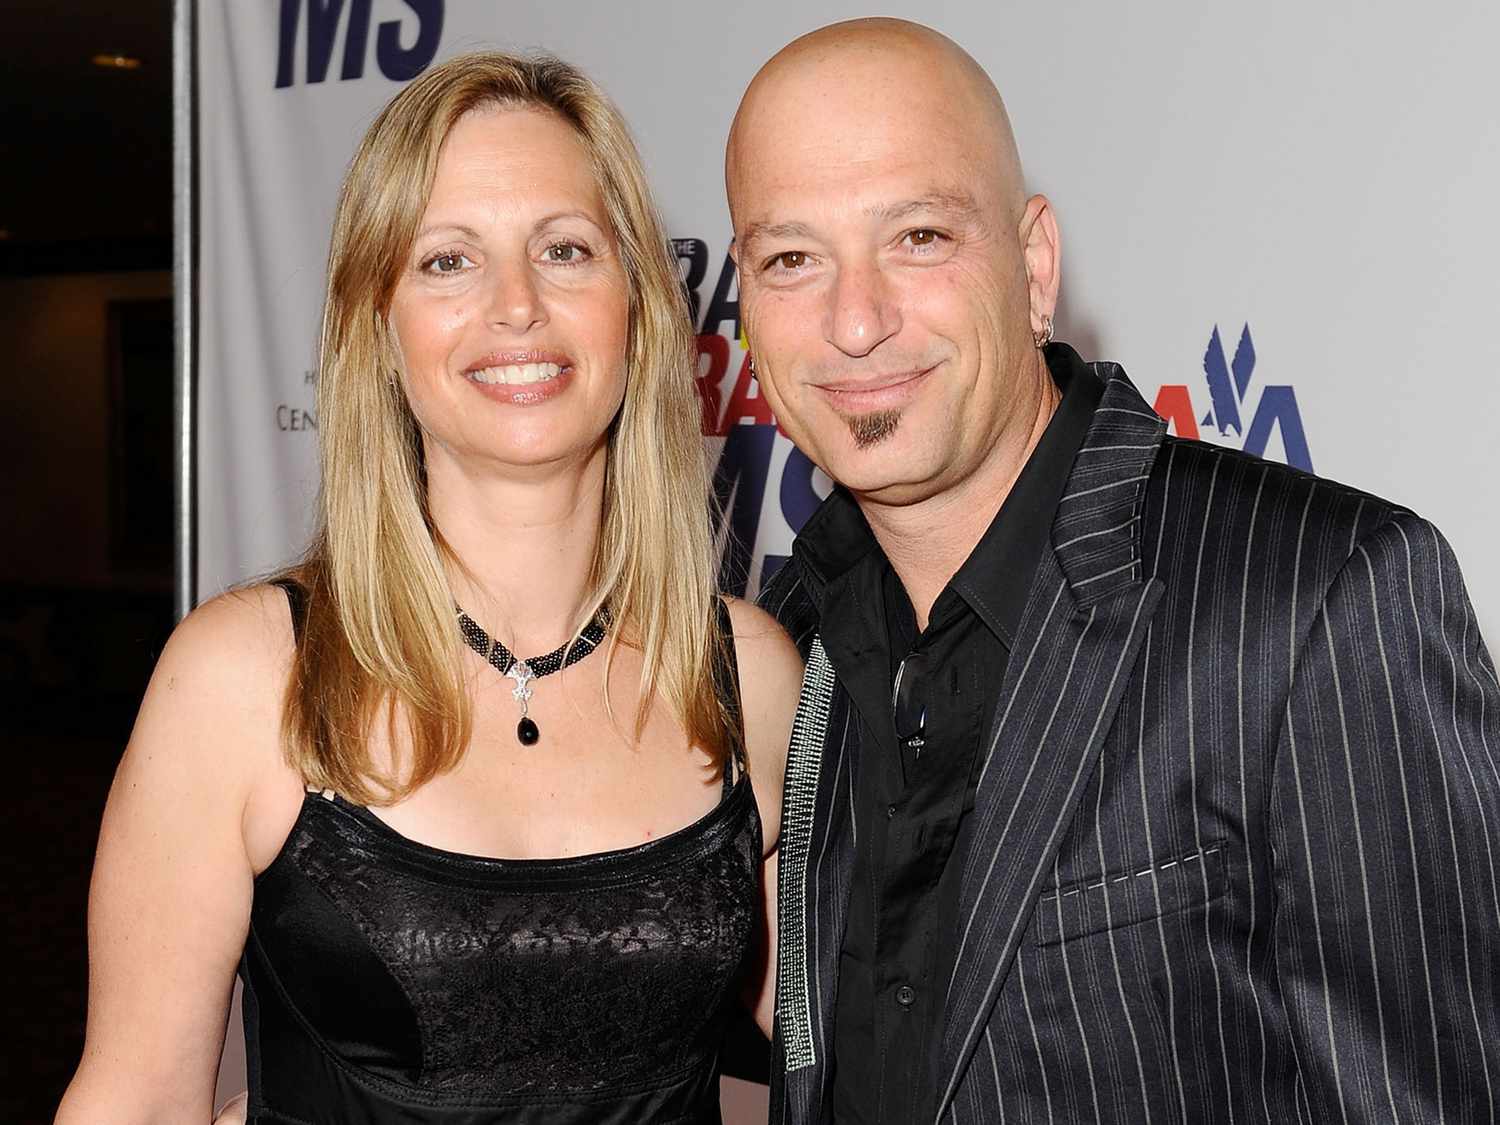 Howie Mandel's personal life and family